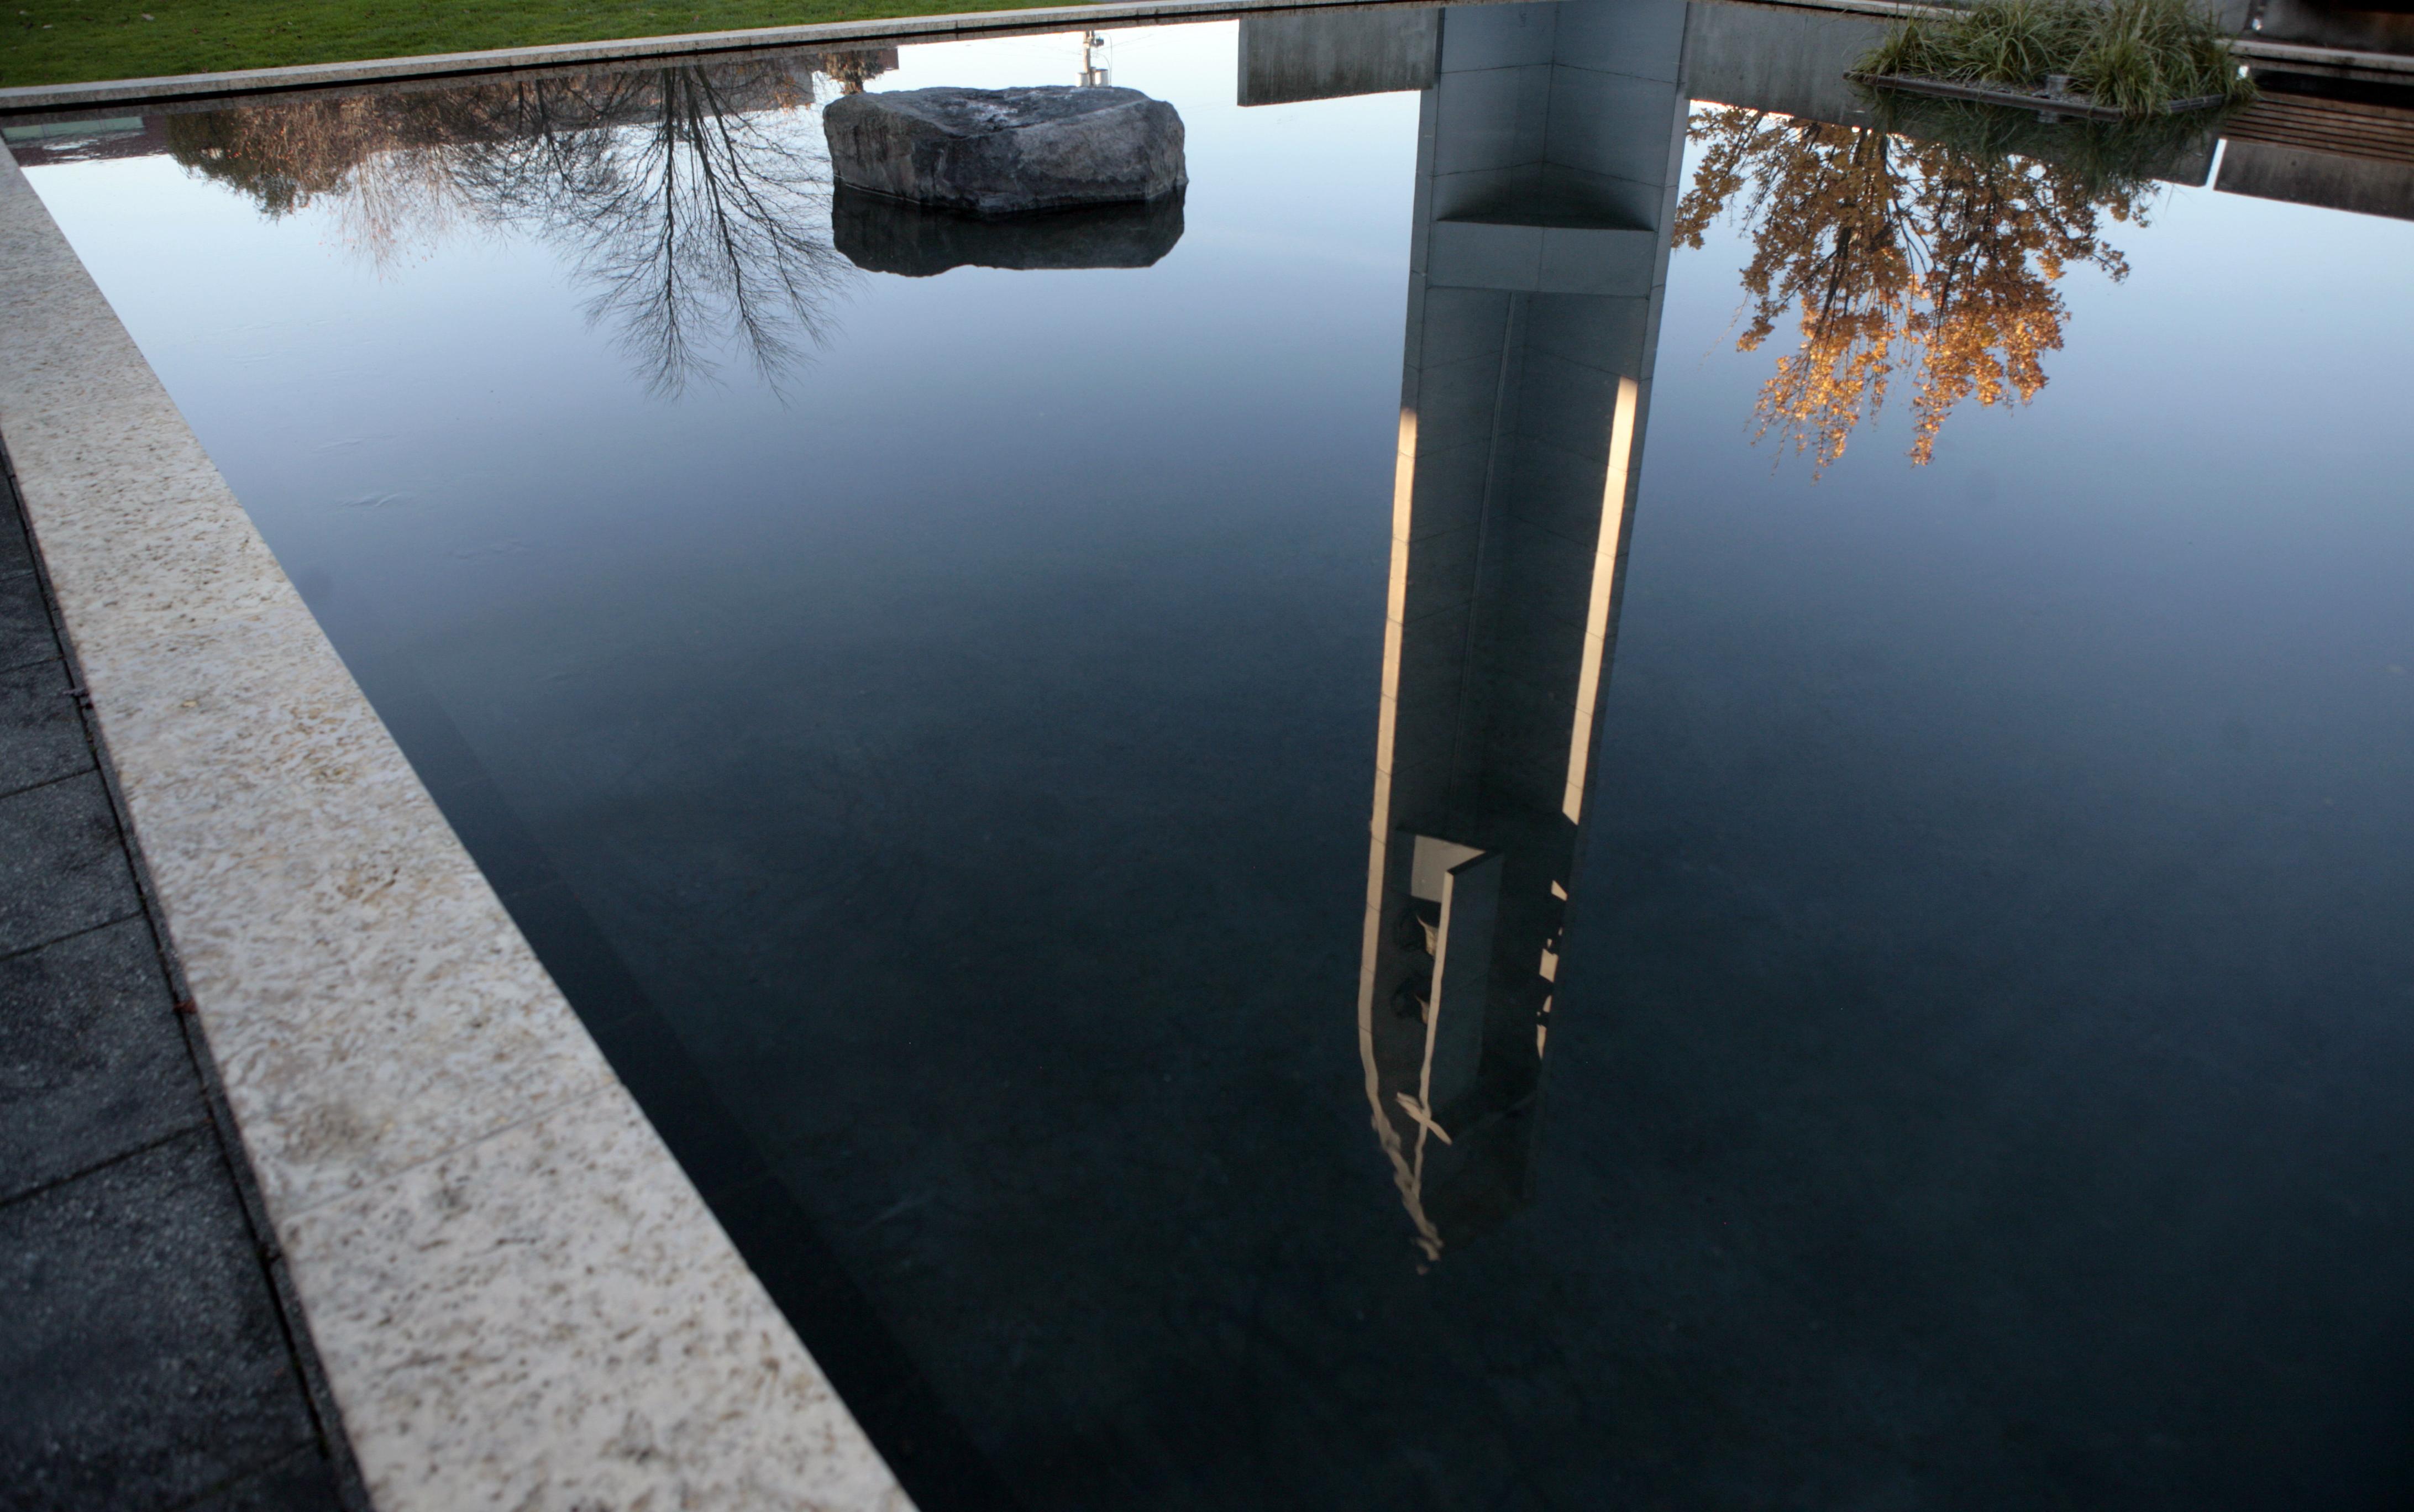 Bell Tower Reflects in Pool